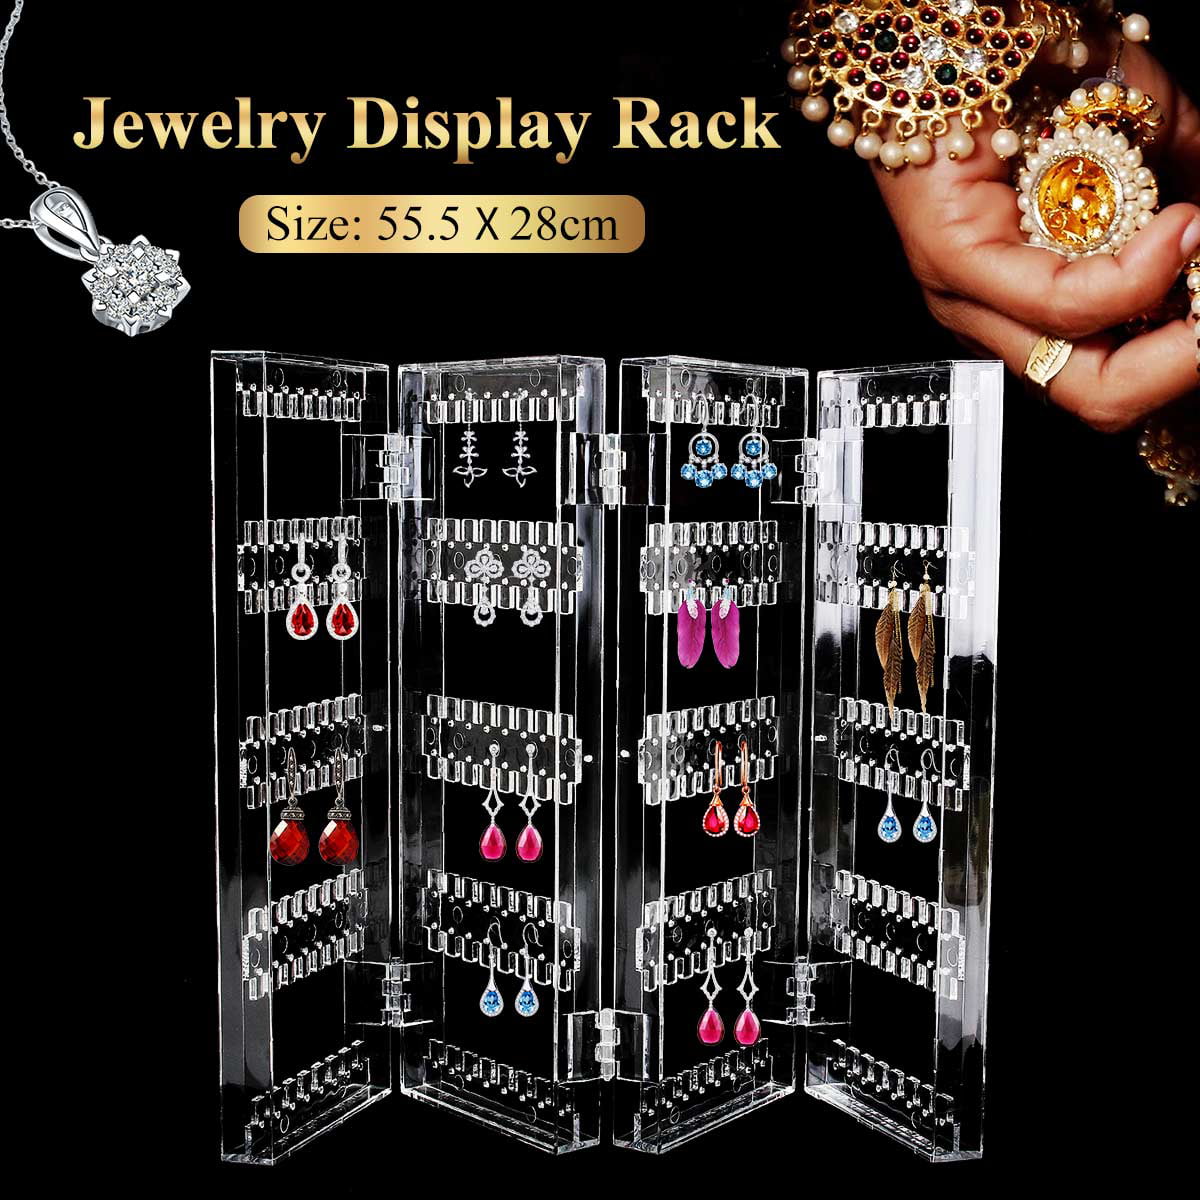 Earrings Ear Studs Necklace Jewelry Display Rack Stand Organizer Case Holder 